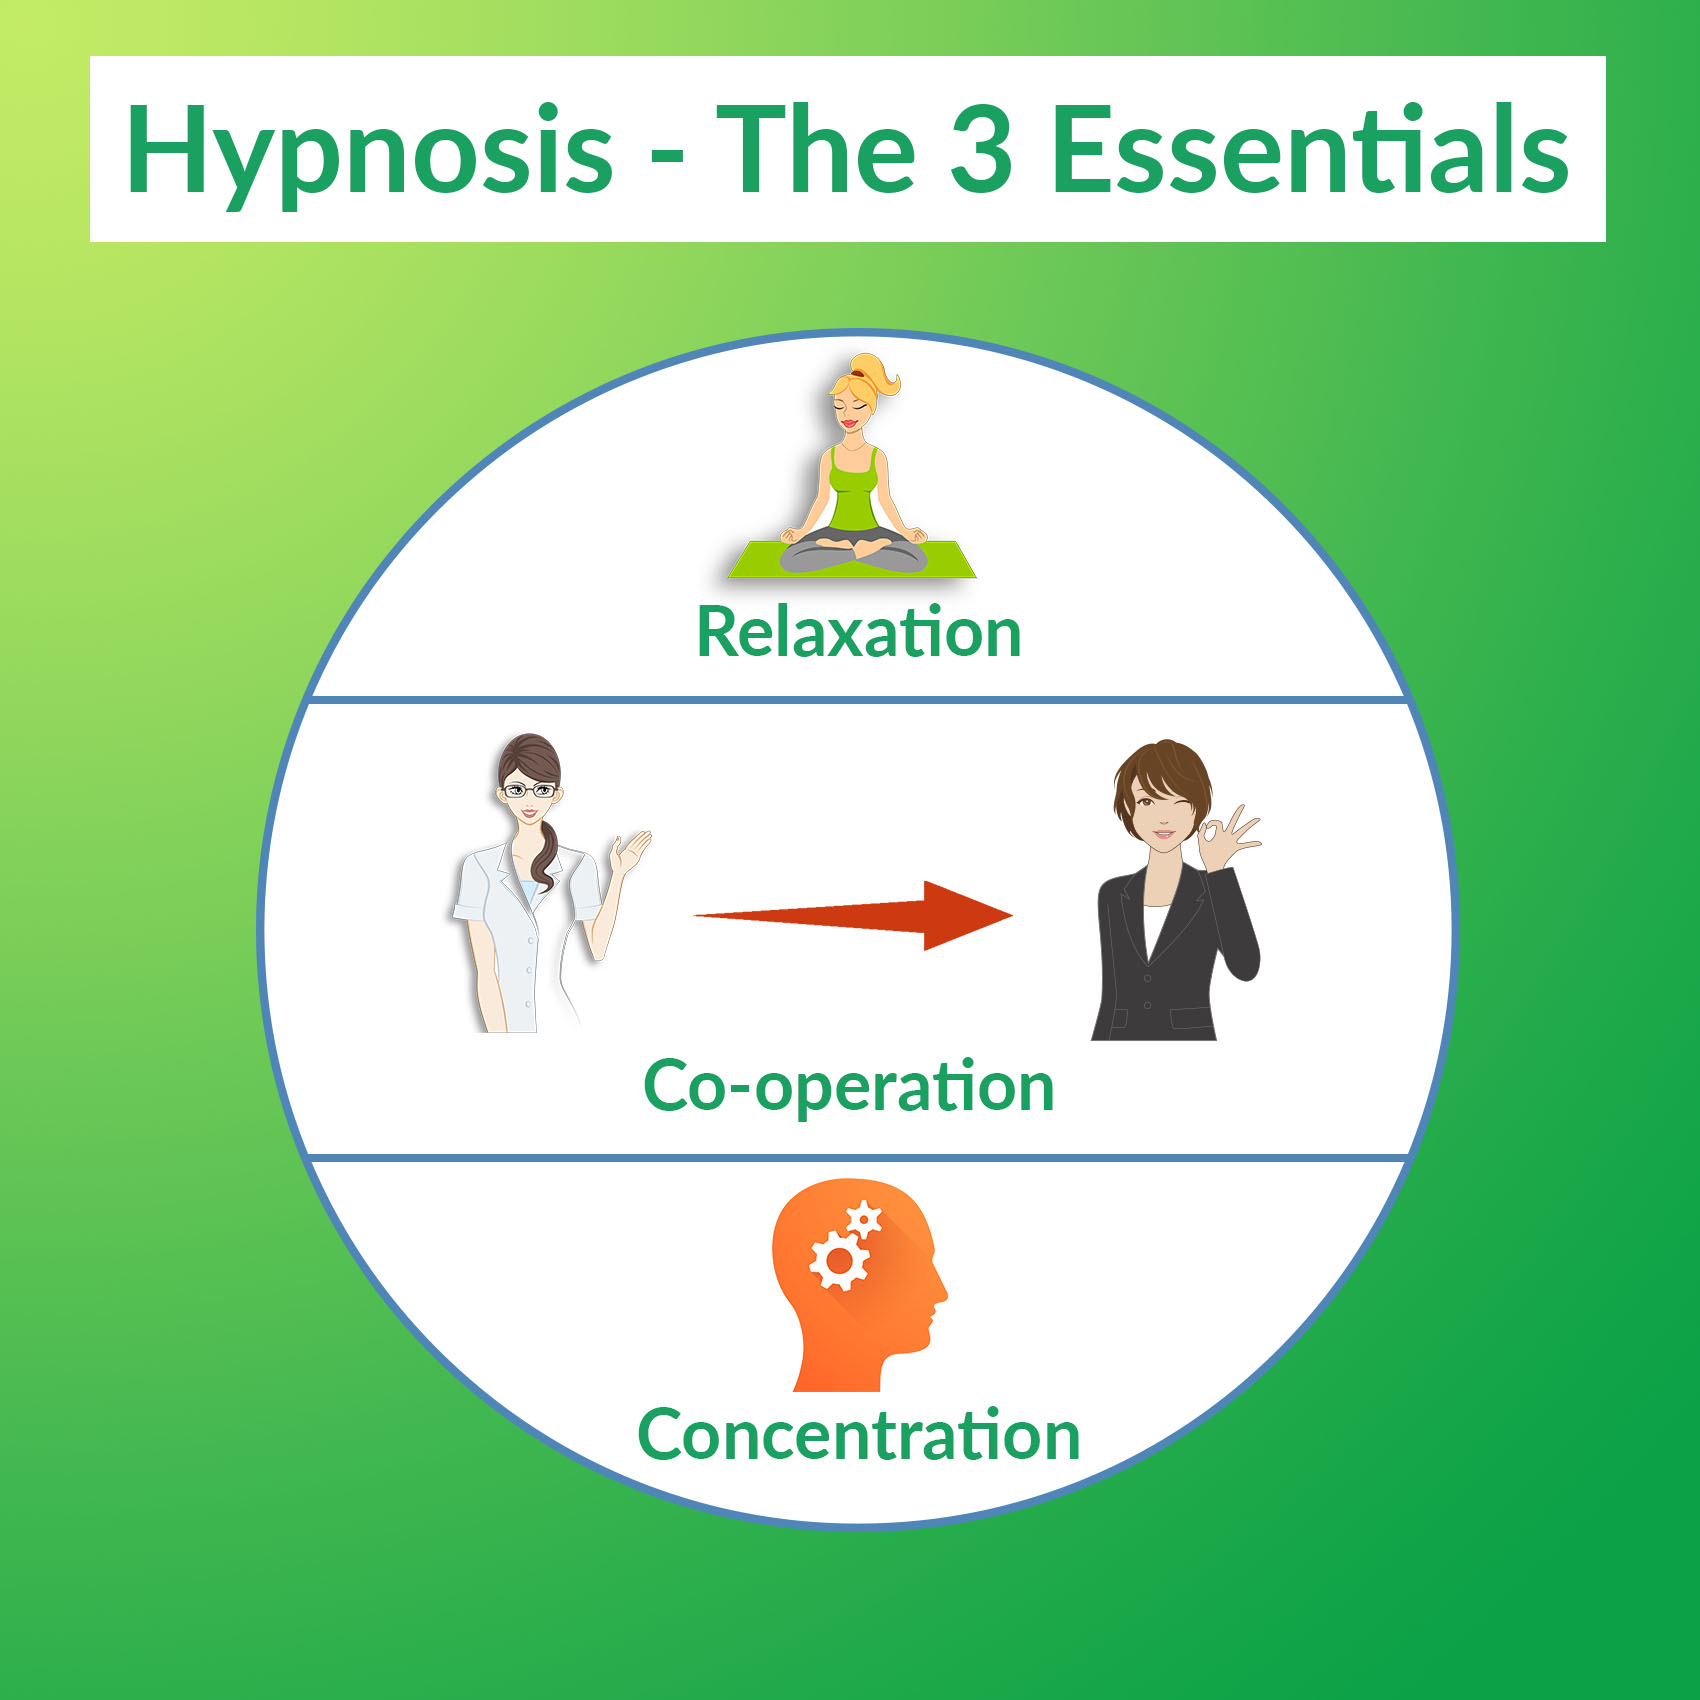 The essential elements of a successful hypnotherapy experience